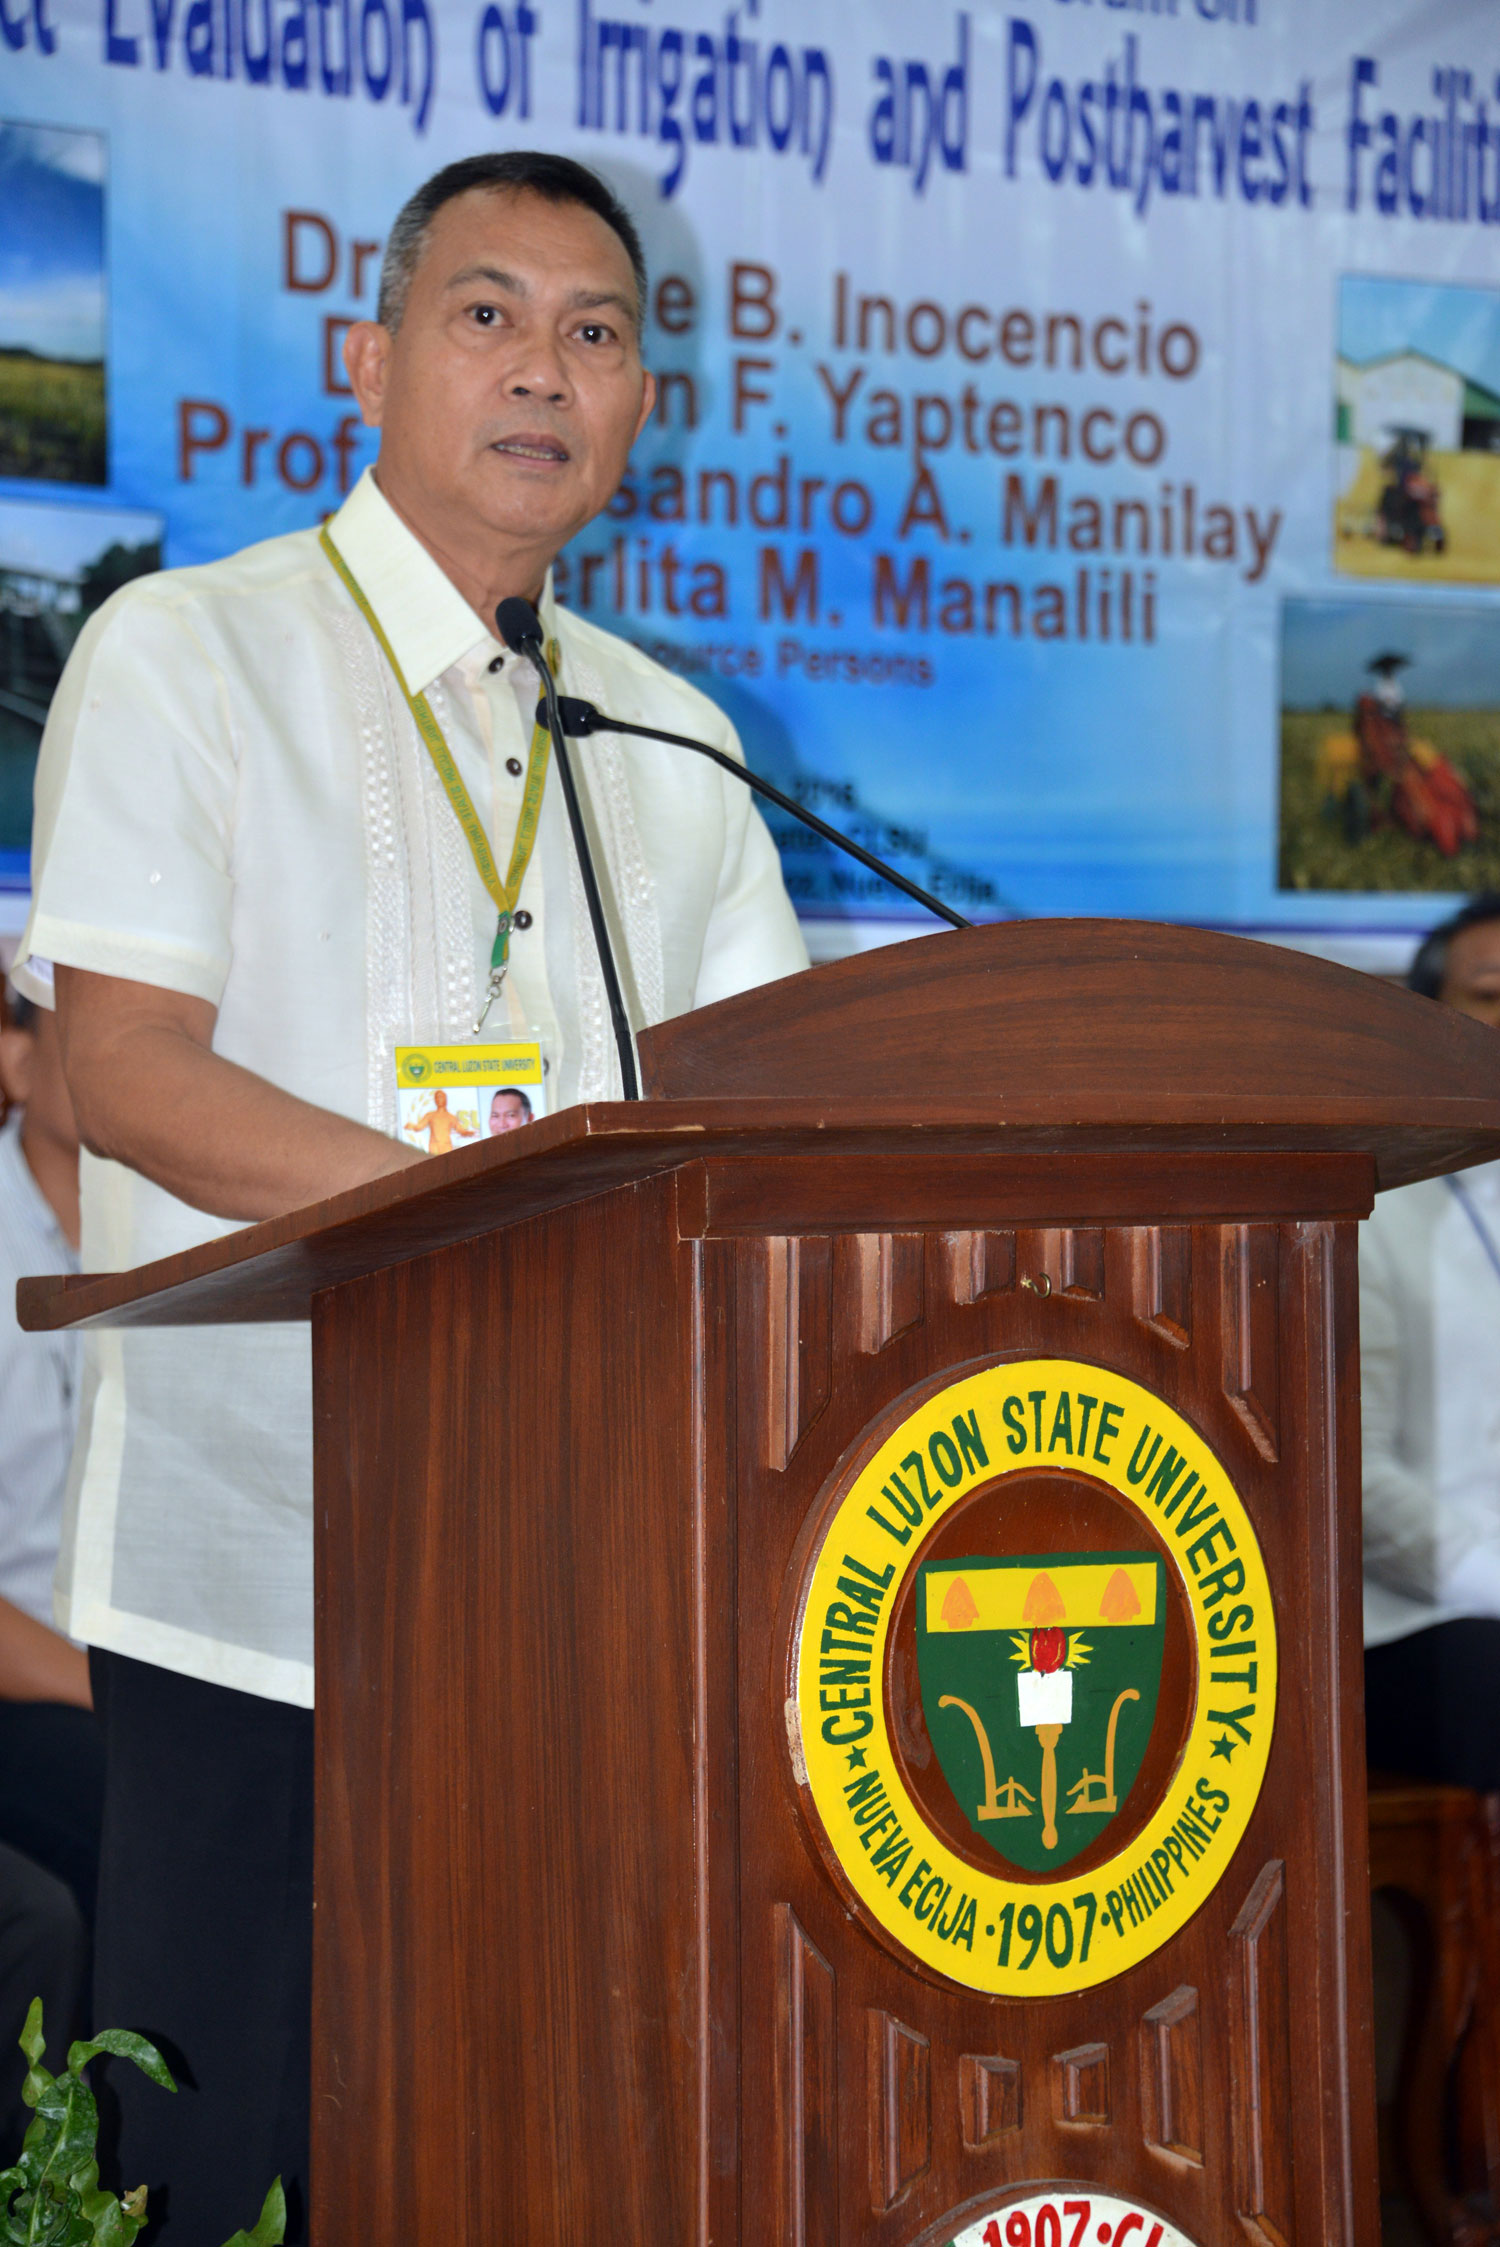 PIDS-CLSU Forum On Impact Evaluation Of Irrigation And Postharvest Facilities-DSC_5739.jpg